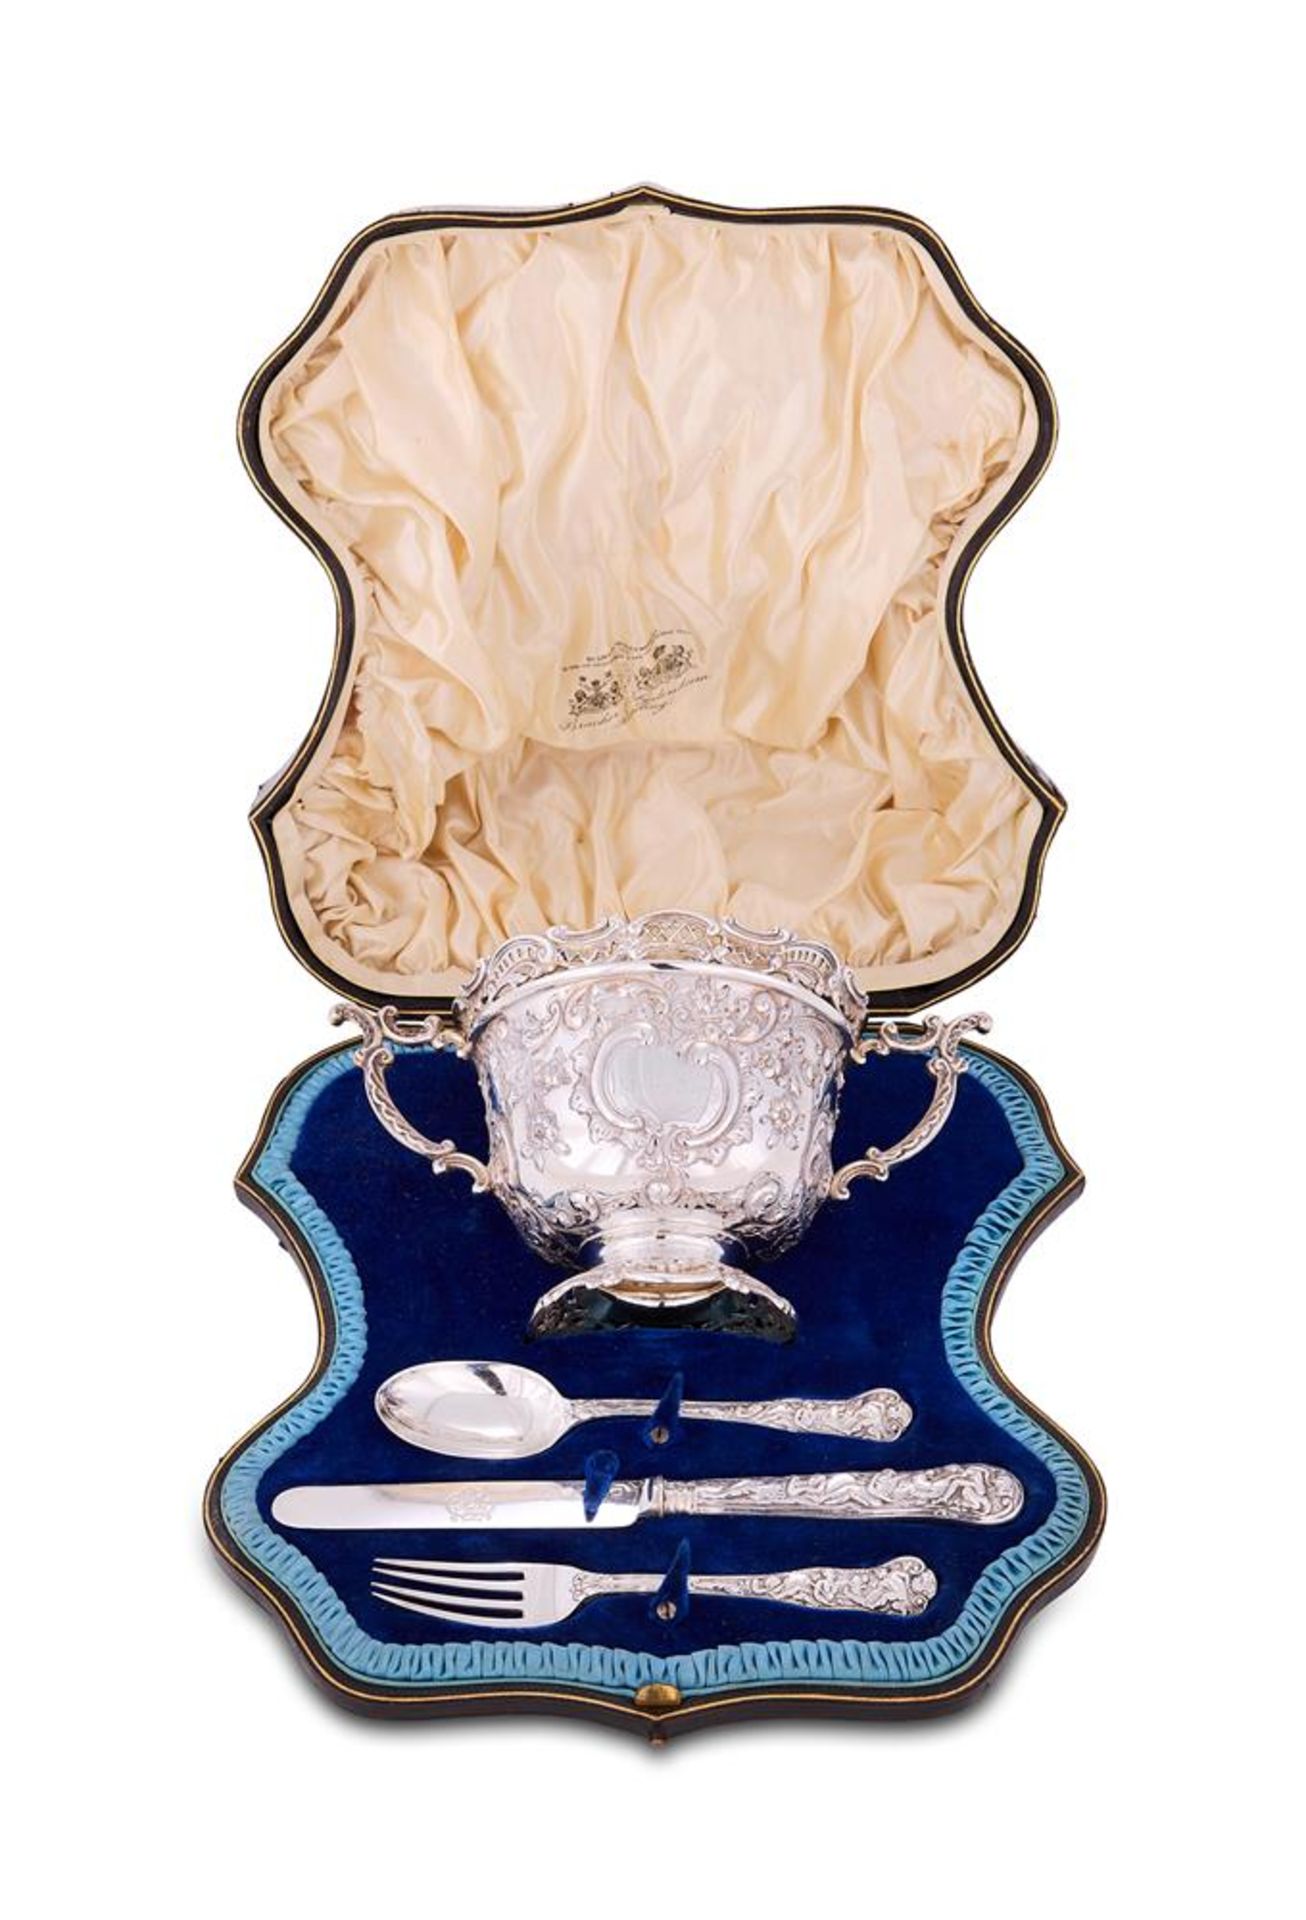 A CASED VICTORIAN CHRISTENING SILVER TWIN HANDLED BOWL, KNIFE, FORK AND SPOON